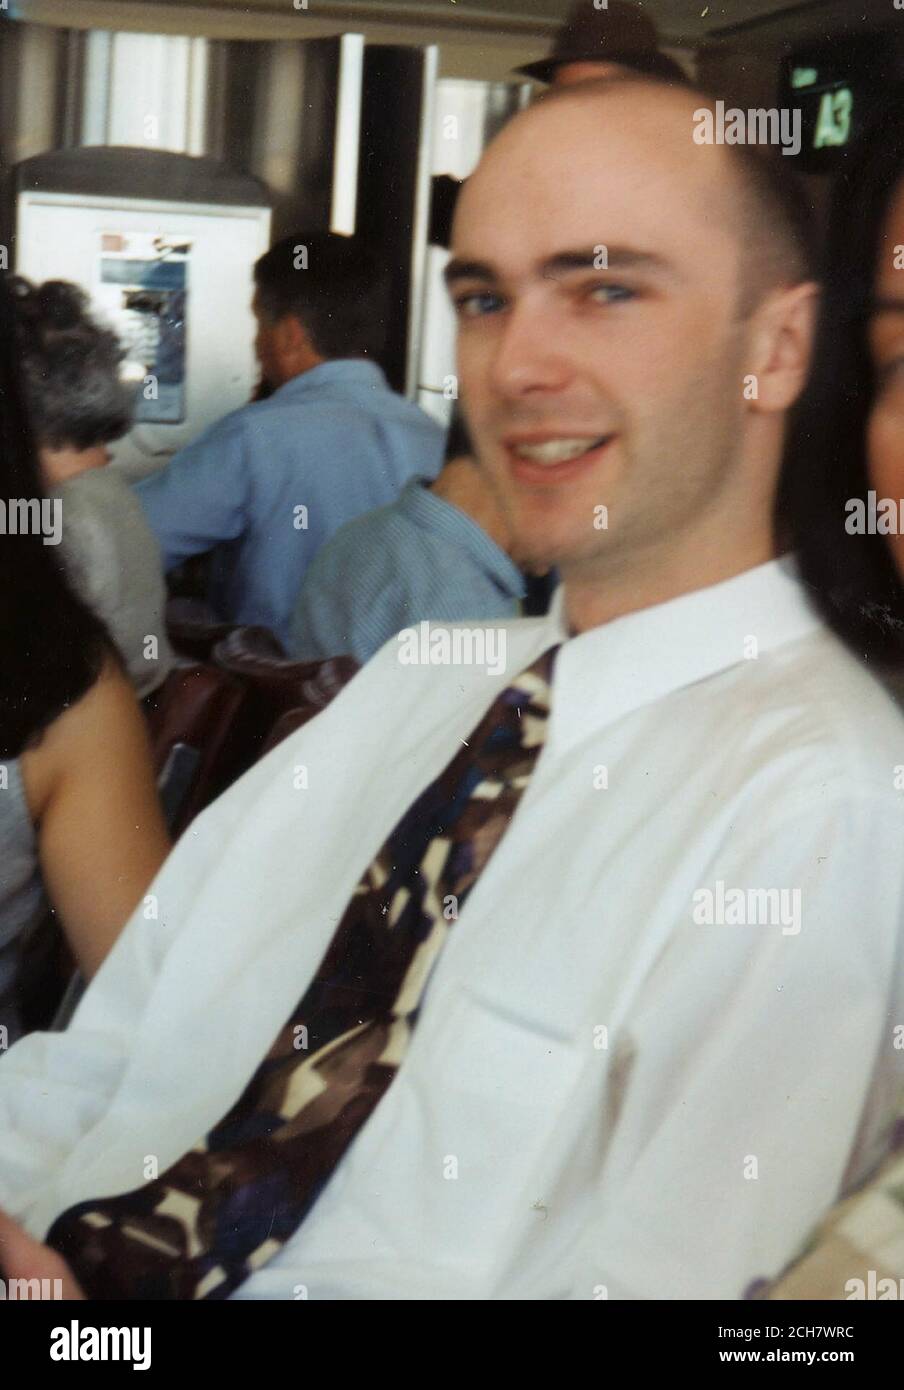 Undated family collect photo of Shaun Attwood, who was held on remand for two years in a jail run by one of toughest sheriffs in the US and has set up a web log to highlight the 'barbaric' conditions there. The 35-year-old Briton, originally from Widnes, Cheshire, spent two years as an unsentenced prisoner on remand in Maricopa County, Arizona and is now serving the rest of his nine-and-a-half-year sentence in a state-run prison in Arizona, where conditions are much better. Stock Photo